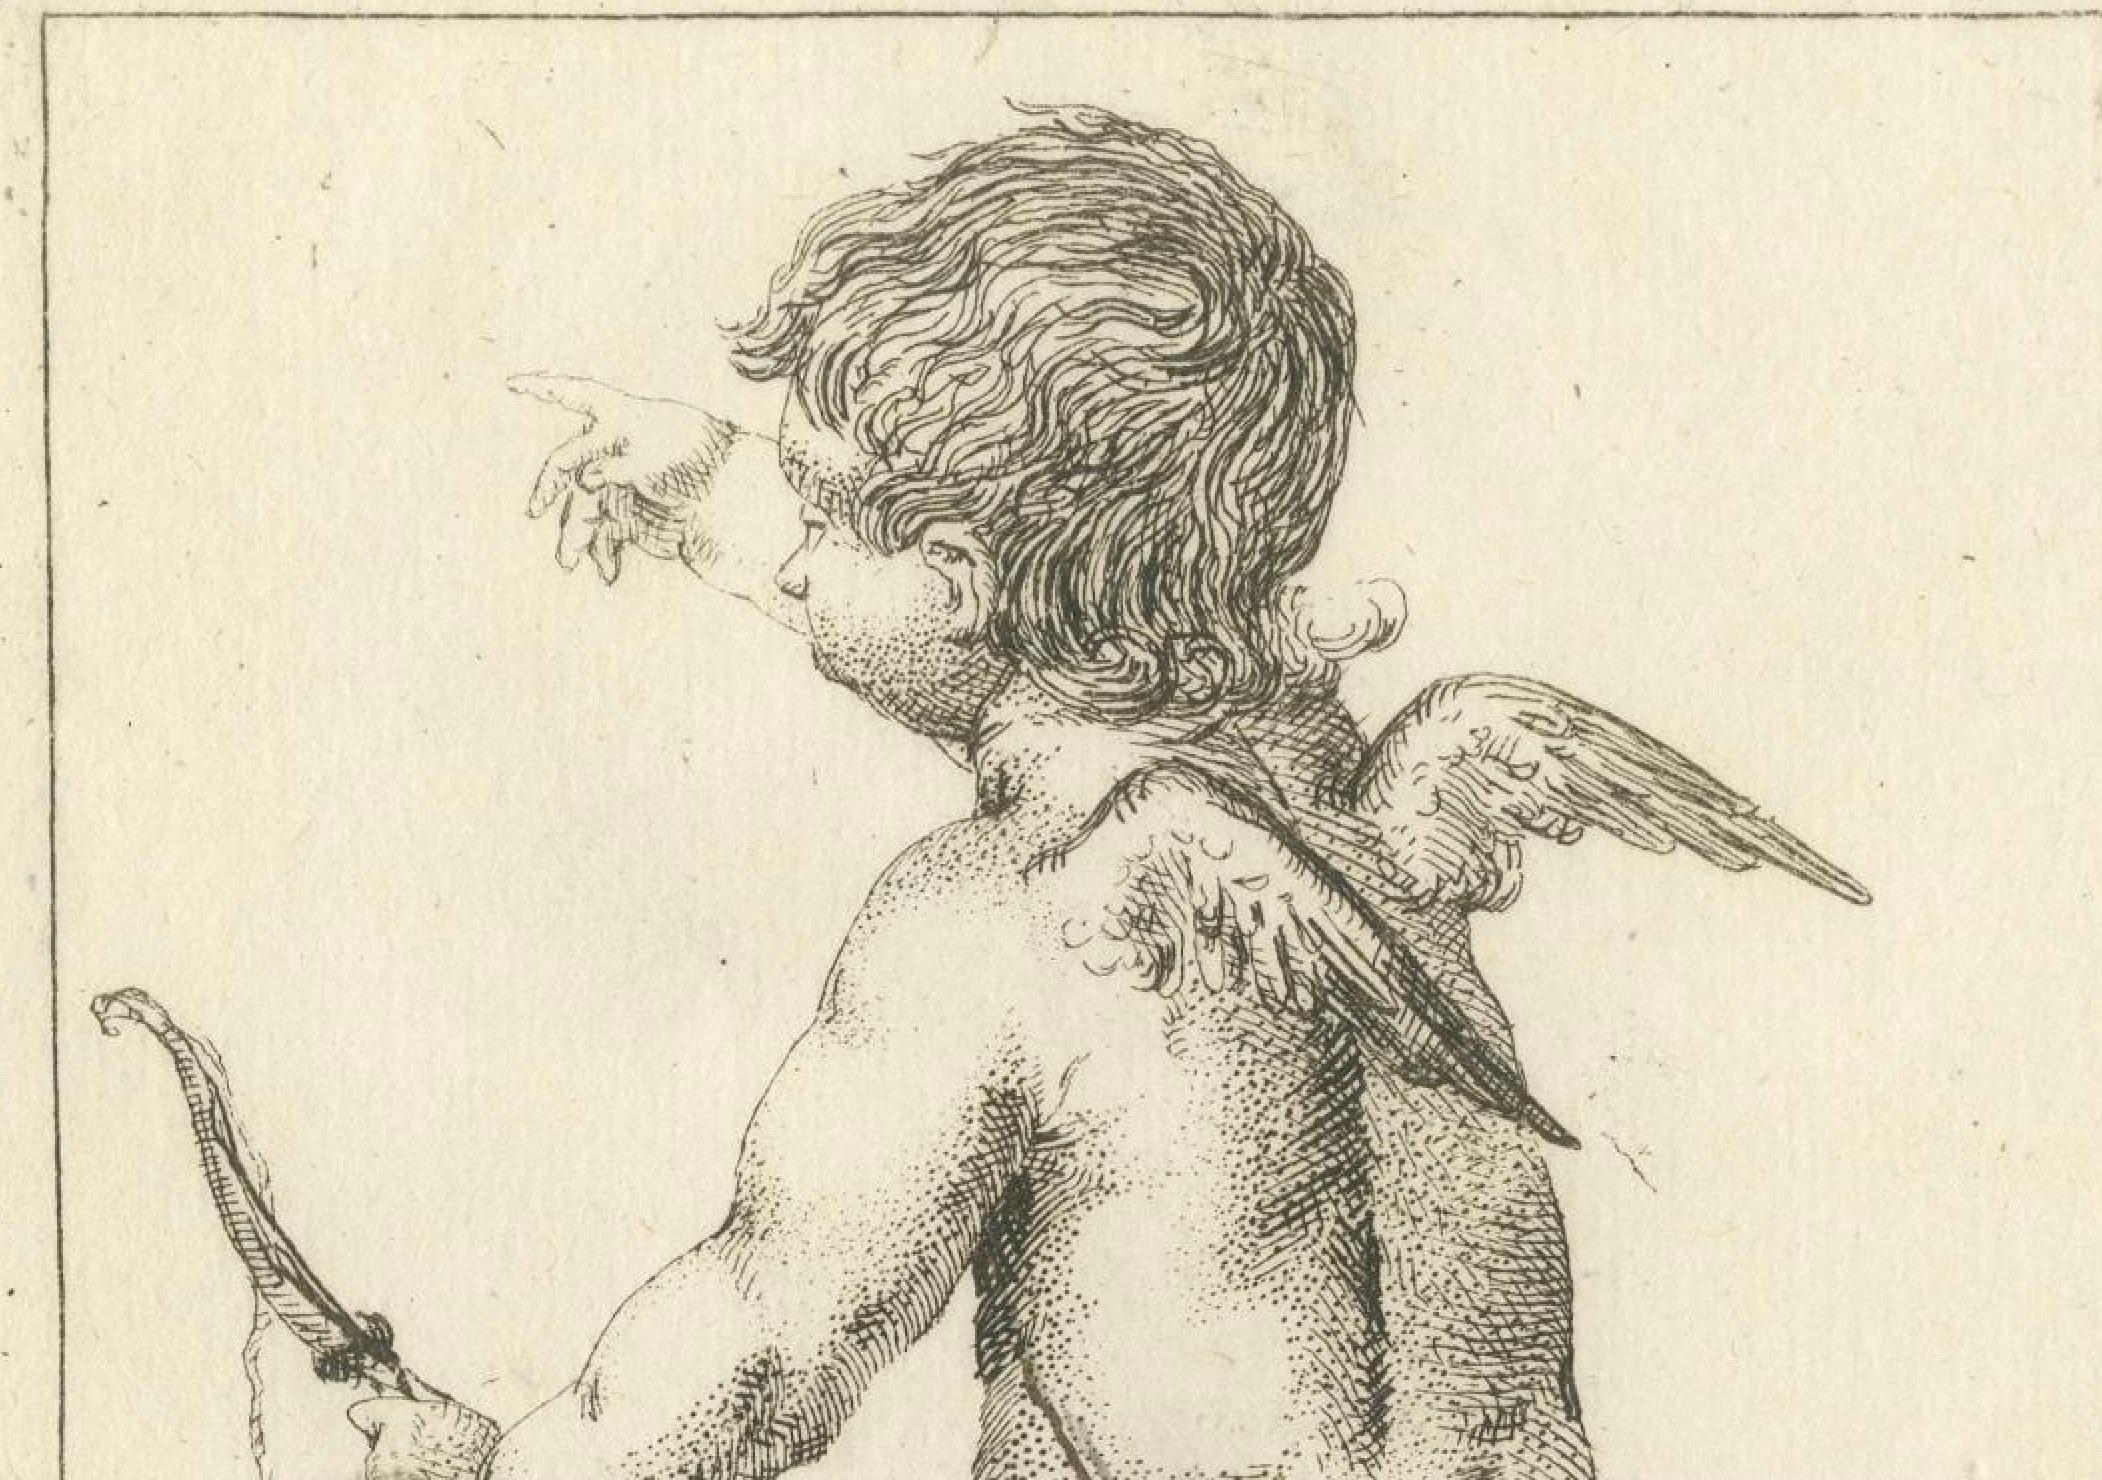 These images are rare but fine examples of original 17th-century European engravings, displaying characteristics that might point to an Italian origin based on stylistic analysis. They depict putti, cherubic figures commonly featured in Baroque art.